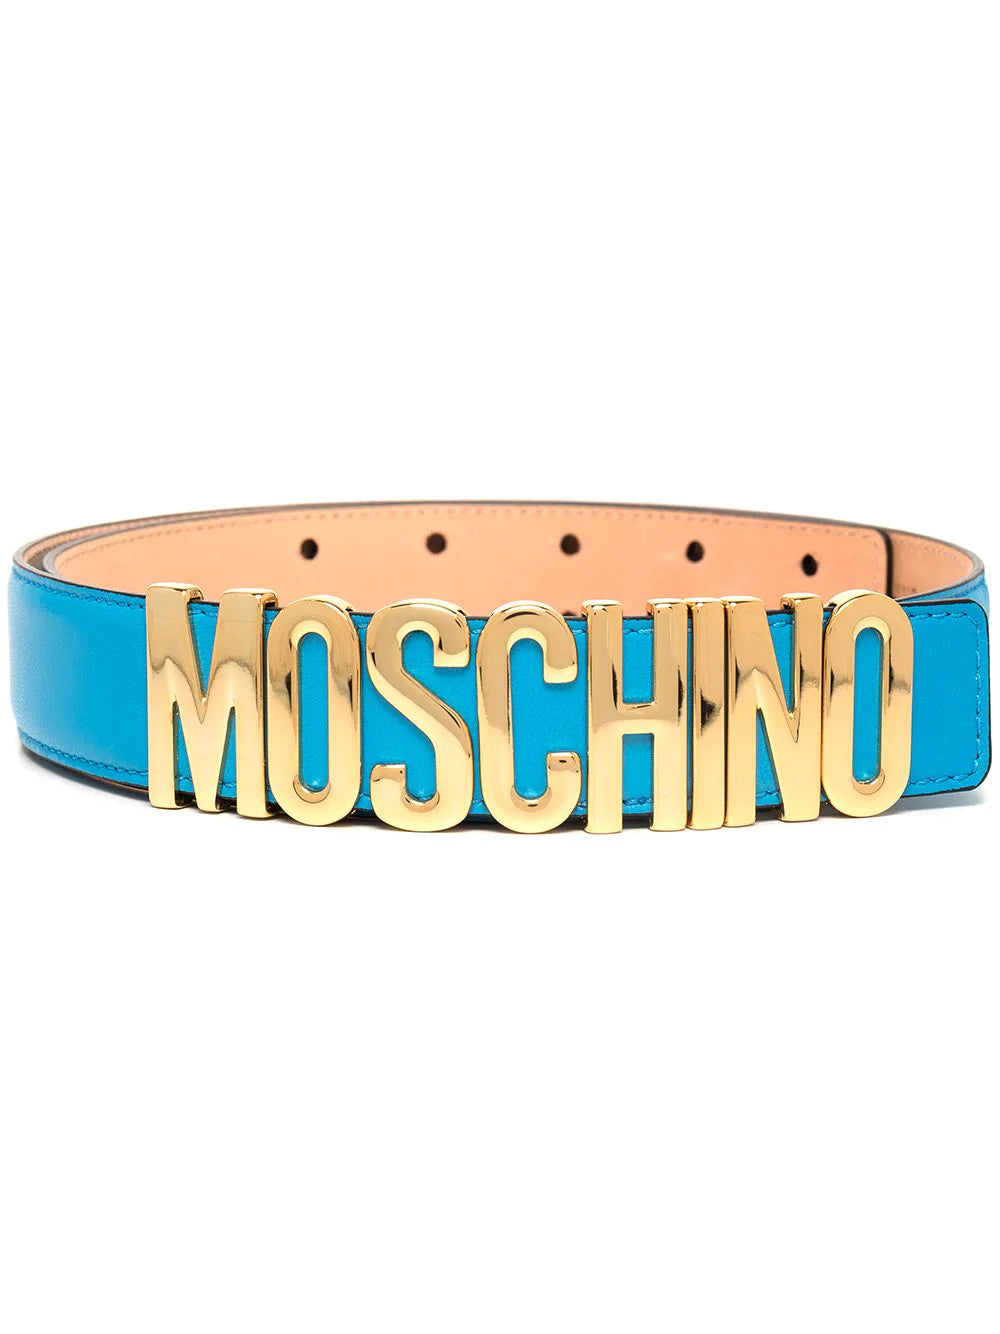 Moschino Blue Belt with Gold Logo Letters